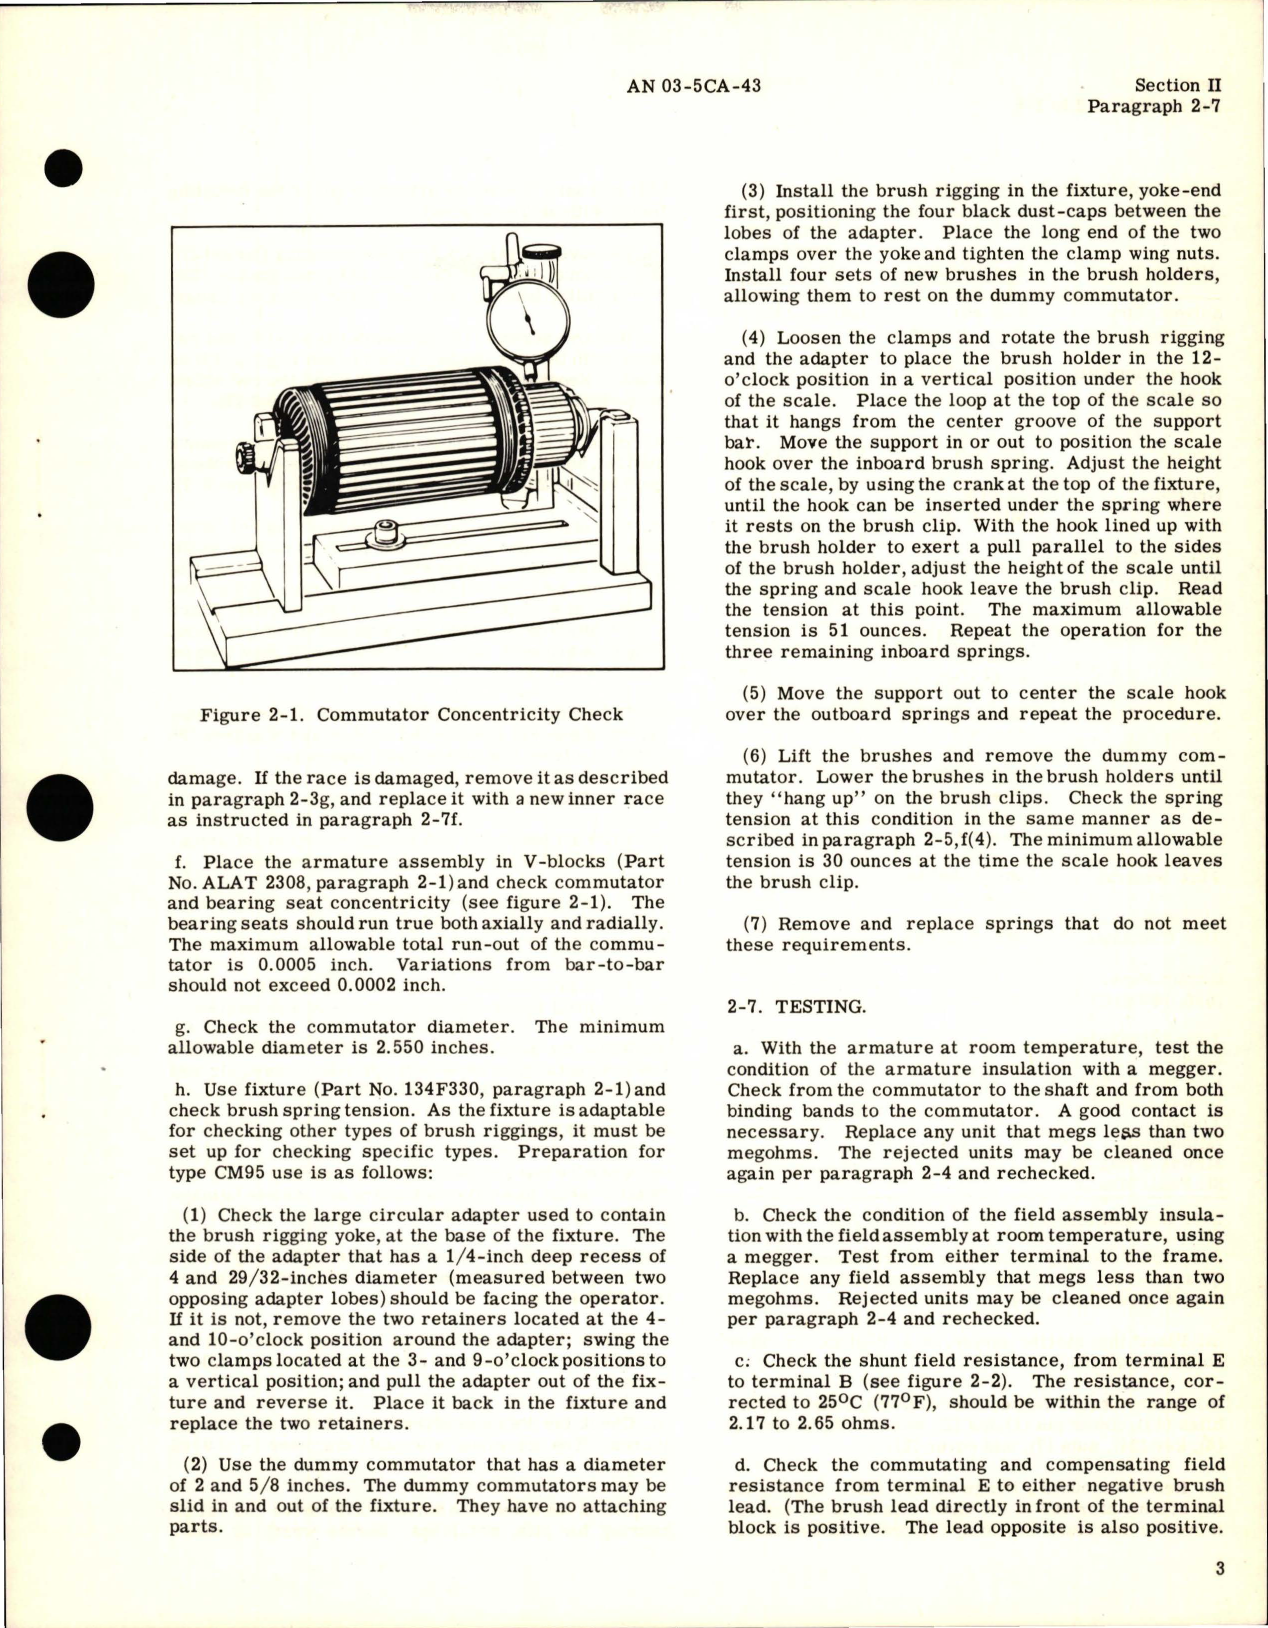 Sample page 7 from AirCorps Library document: Overhaul Instructions for Starter-Motors - Models 2CM95B13, 2CM95B18, and 2CM95B19 